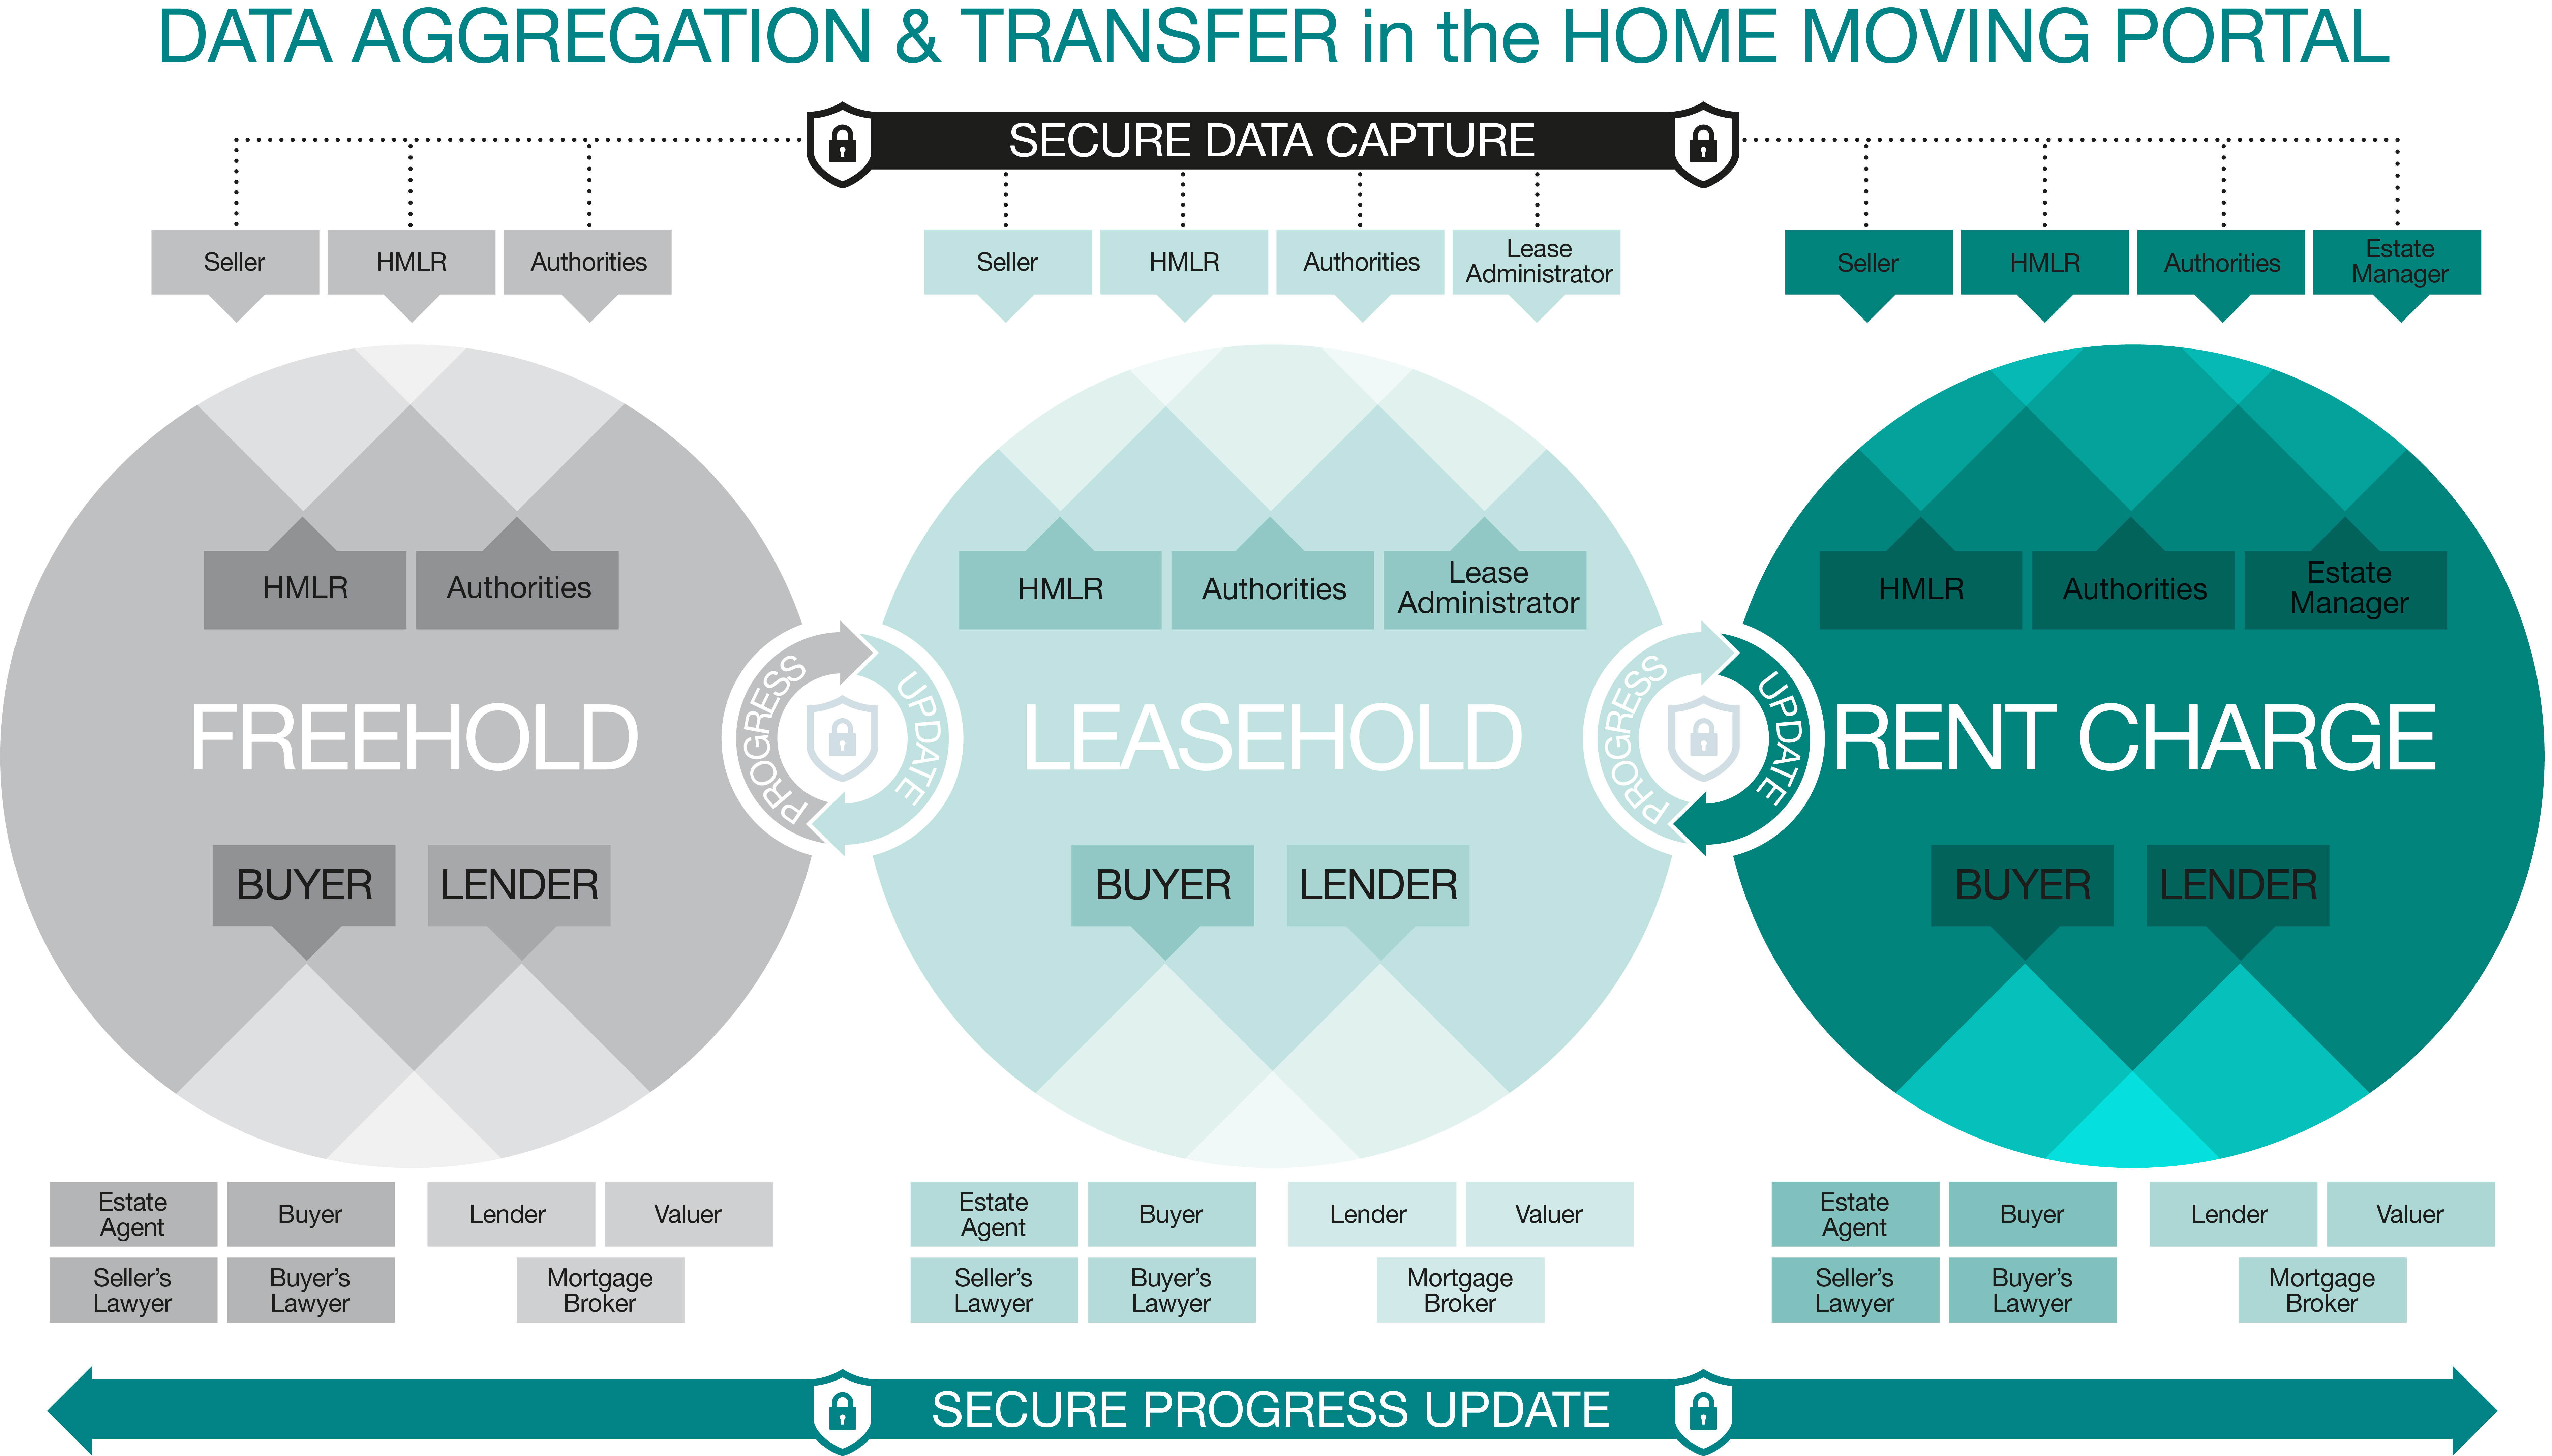 Figure 1: Data aggregation and transfer in the Conveyancing Association's Home Moving Portal